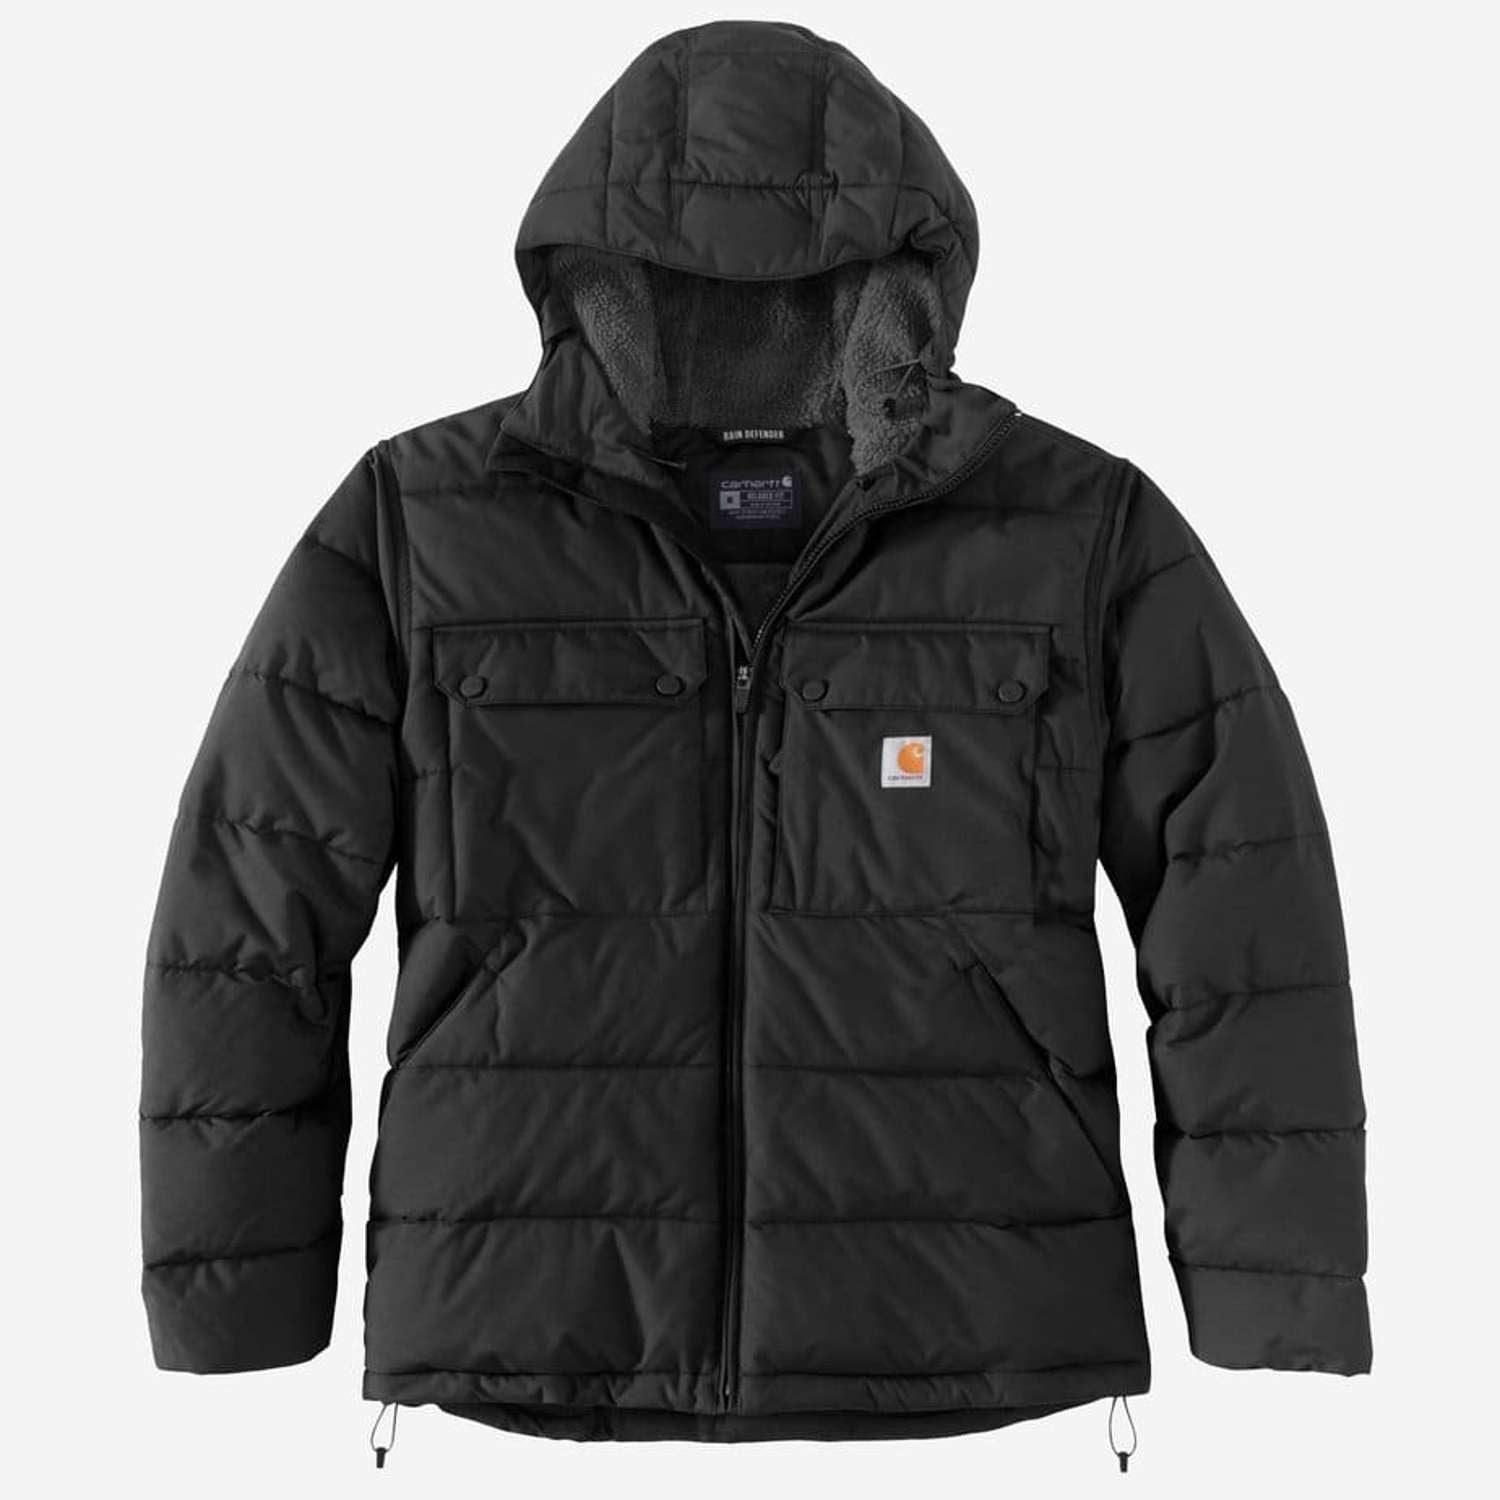 Se CARHARTT Loose Fit Midweight Insulated Jacket BLACK - M hos Toolster.dk